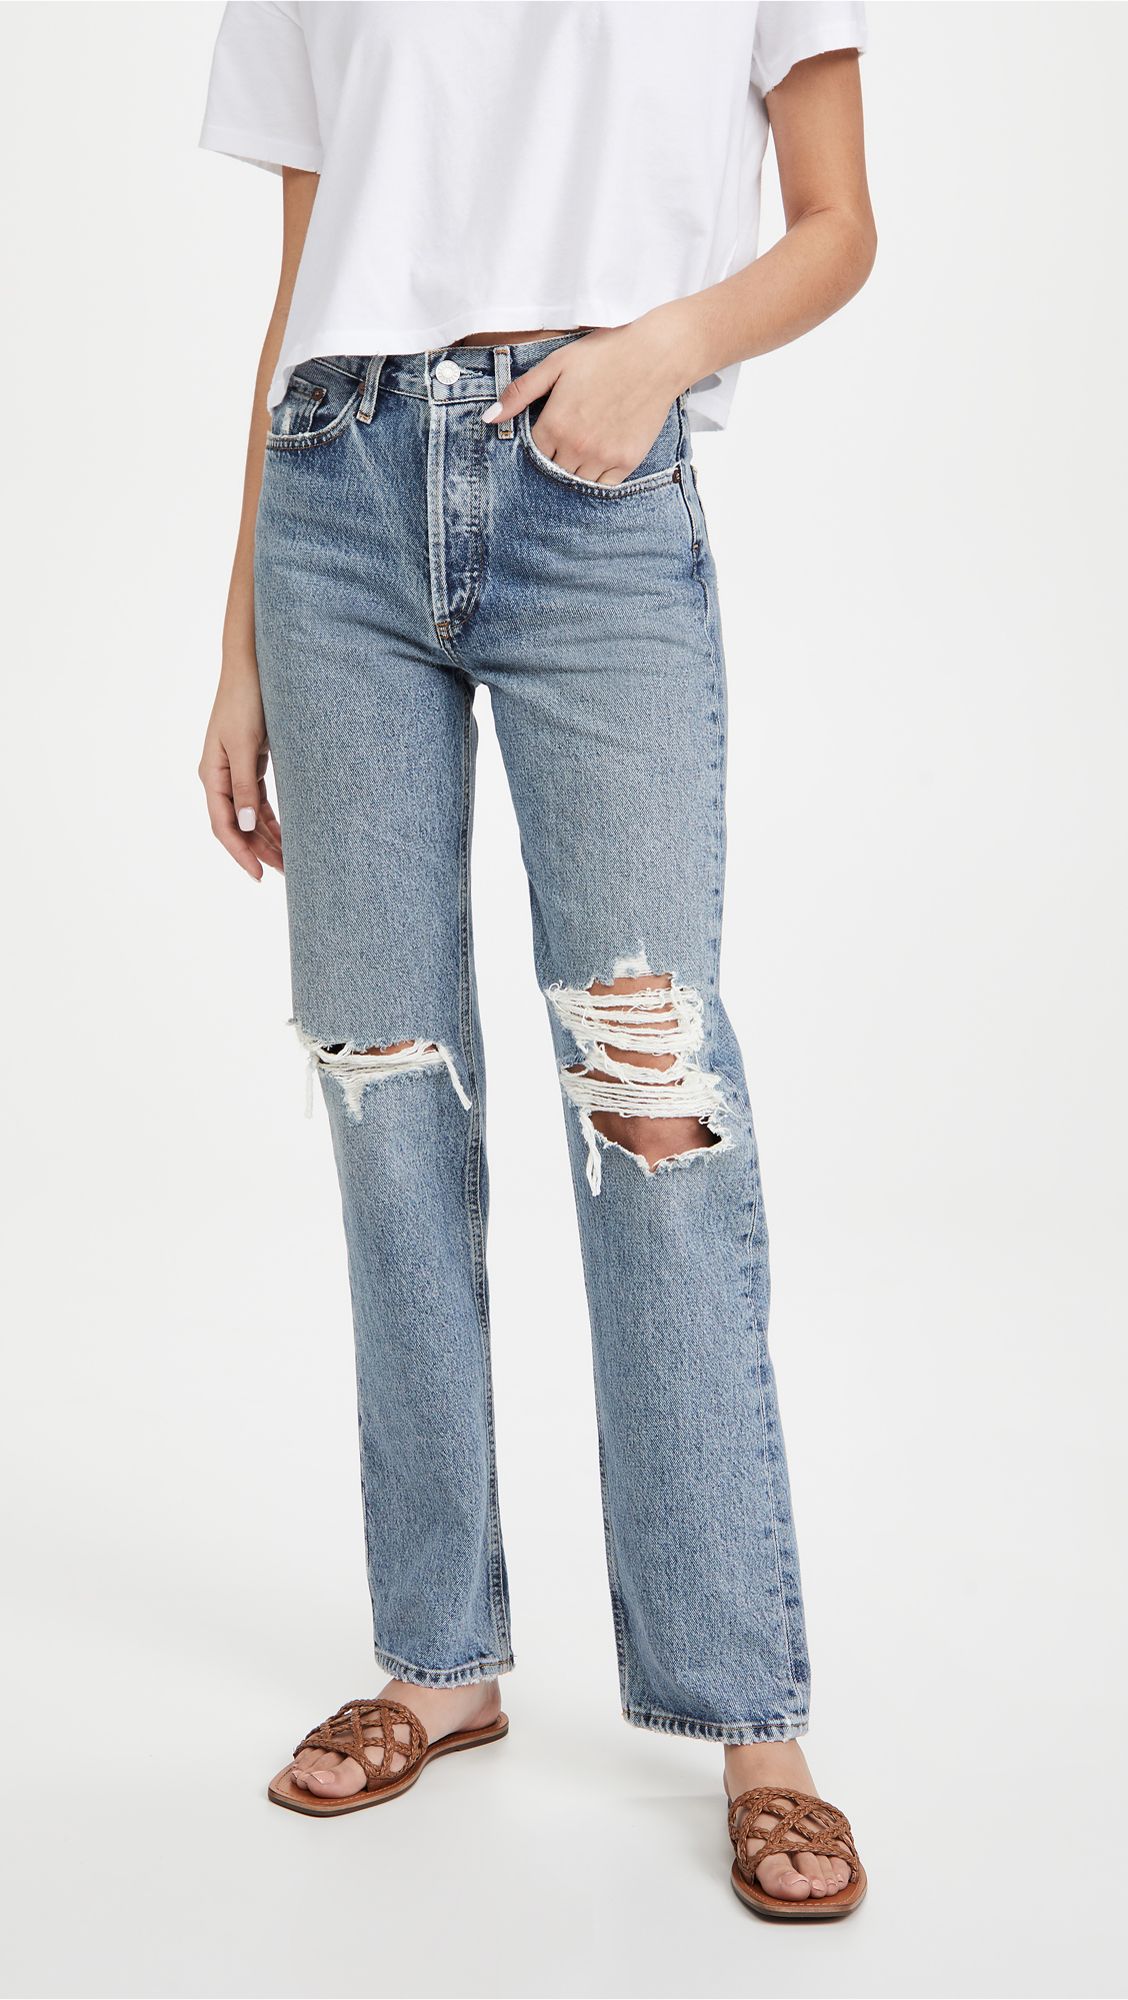 The 5 Best Designer Jeans Brands for Women | Who What Wear